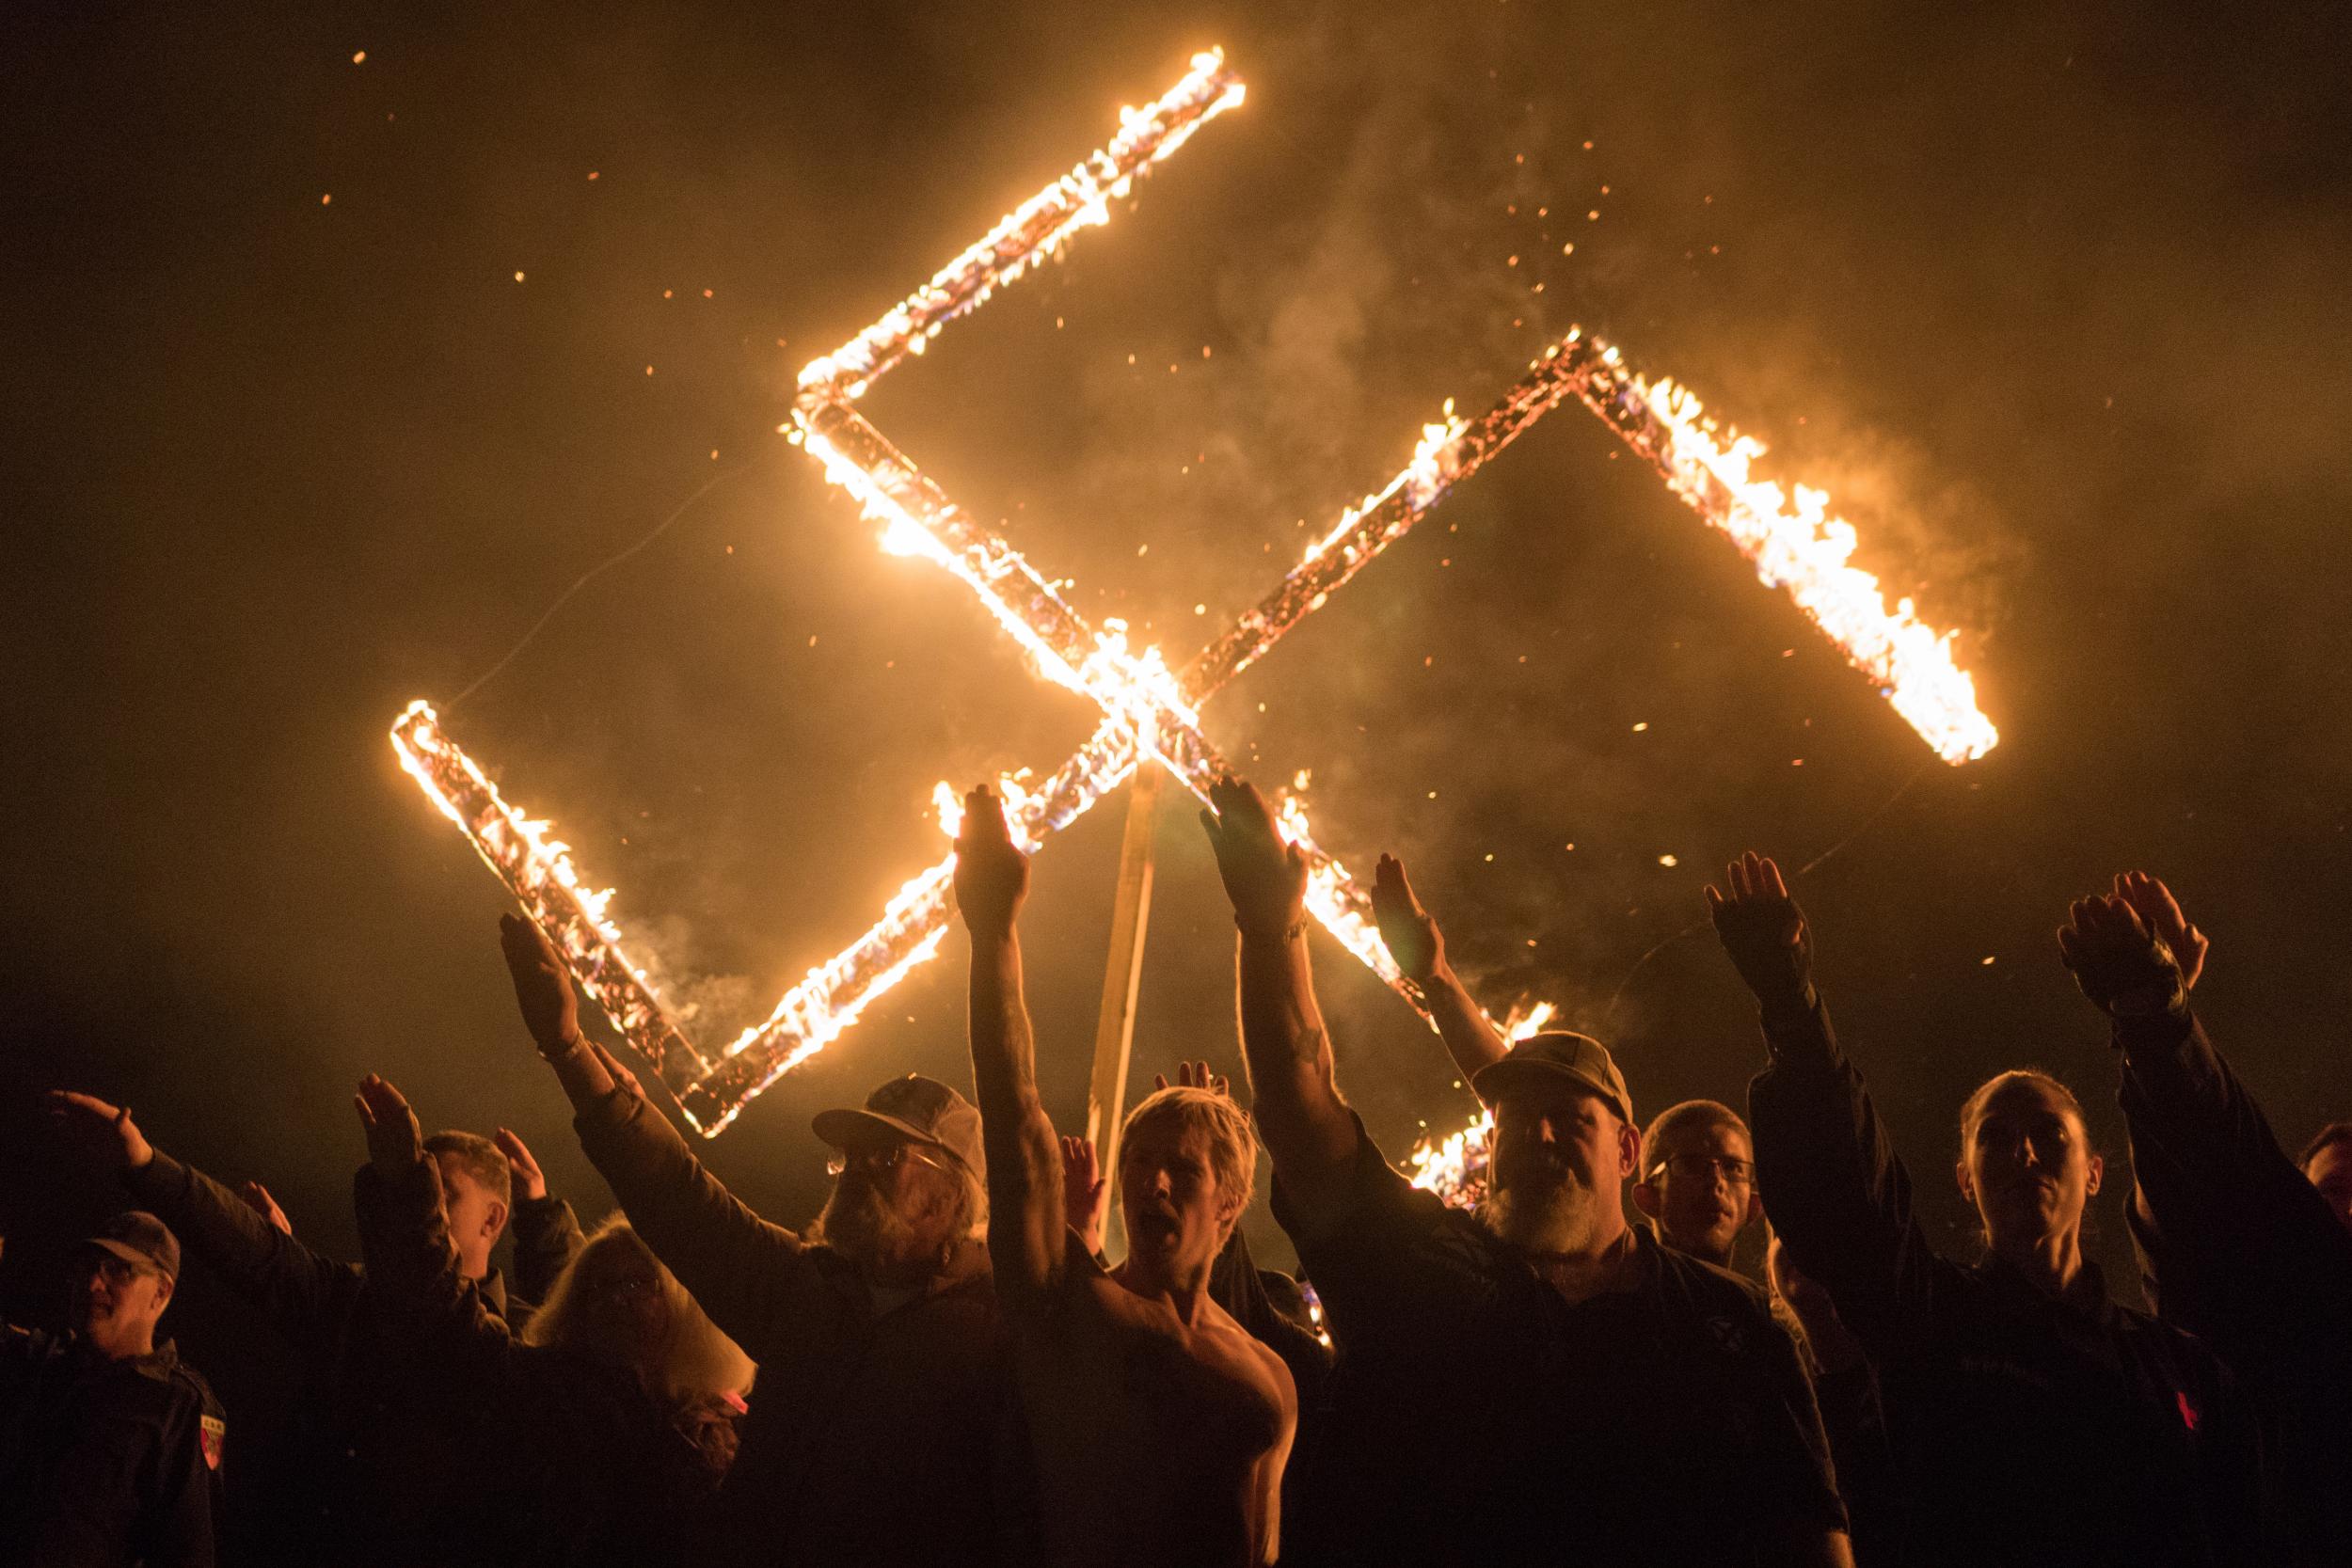 Nazis and other extremists appear to be migrating to Google Plus after a crack down from other social networks